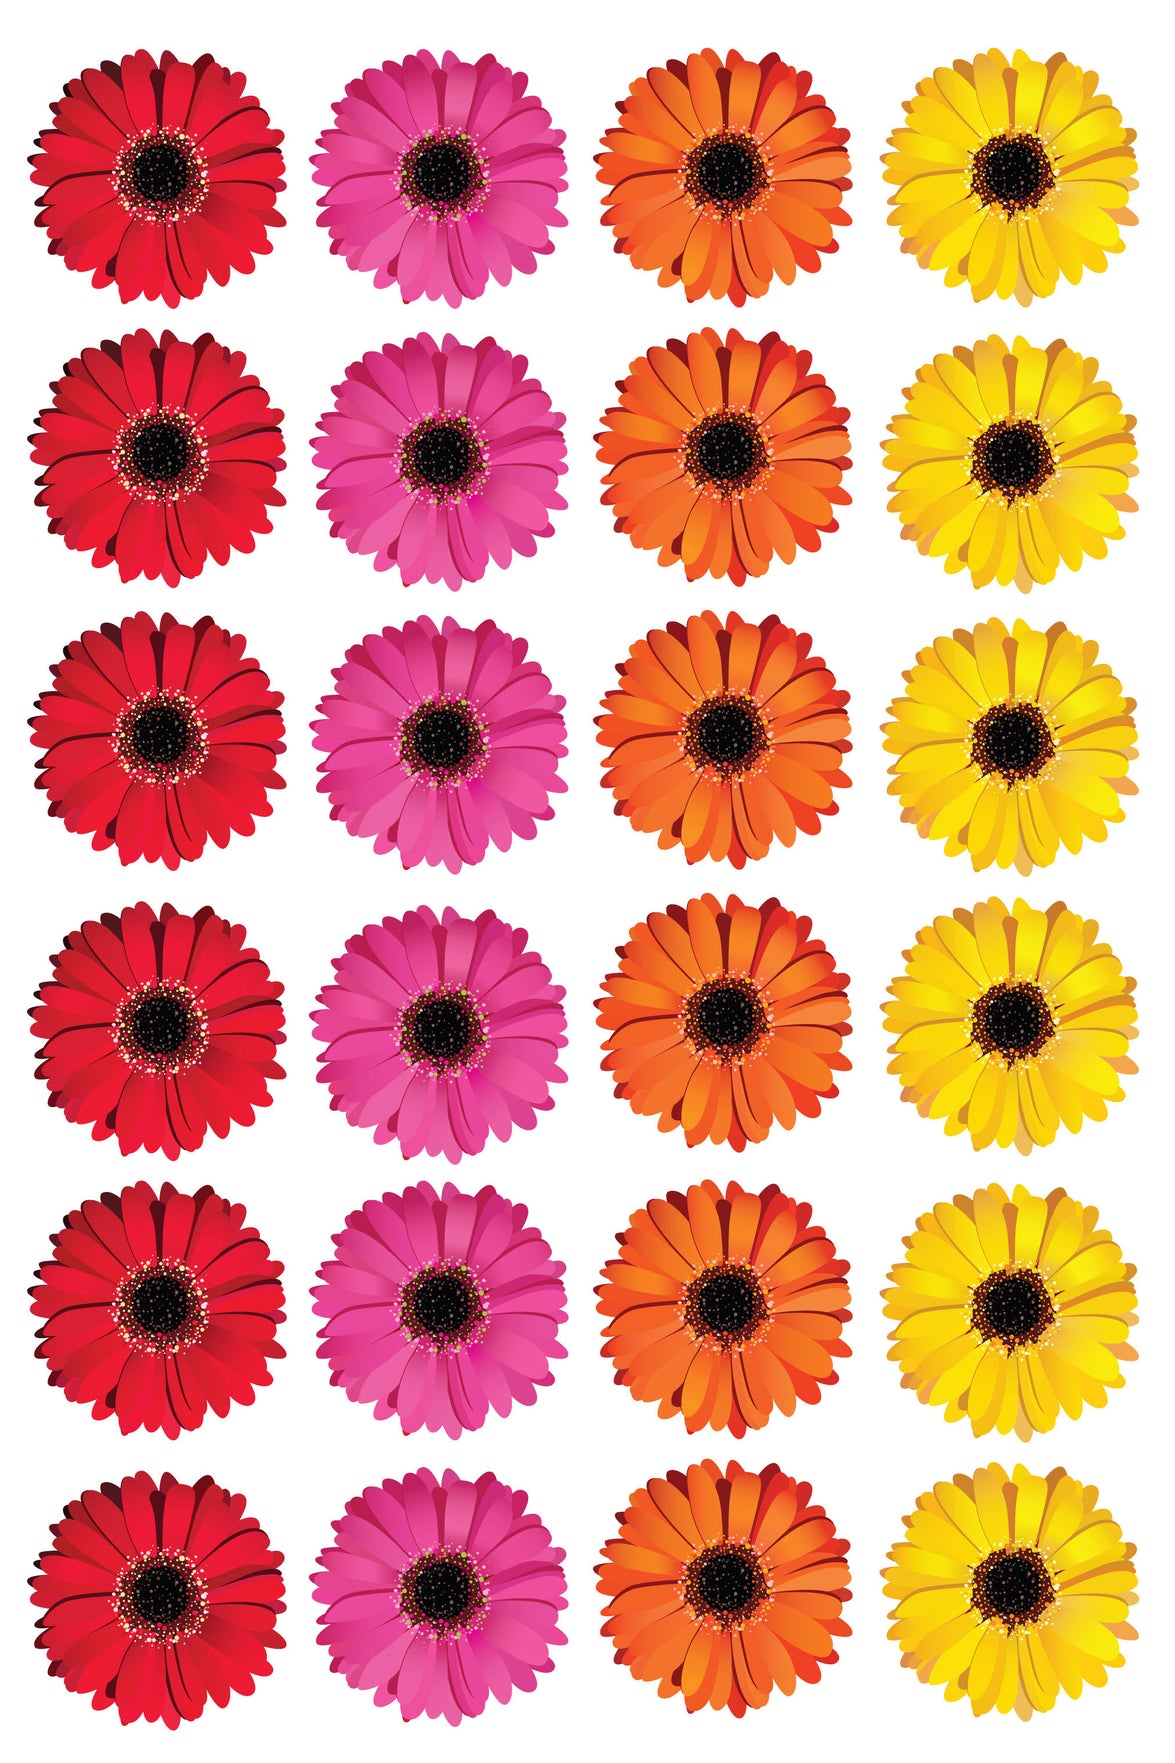 Flowers Red Pink Orange Yellow Edible Cupcake Topper Images ABPID13228